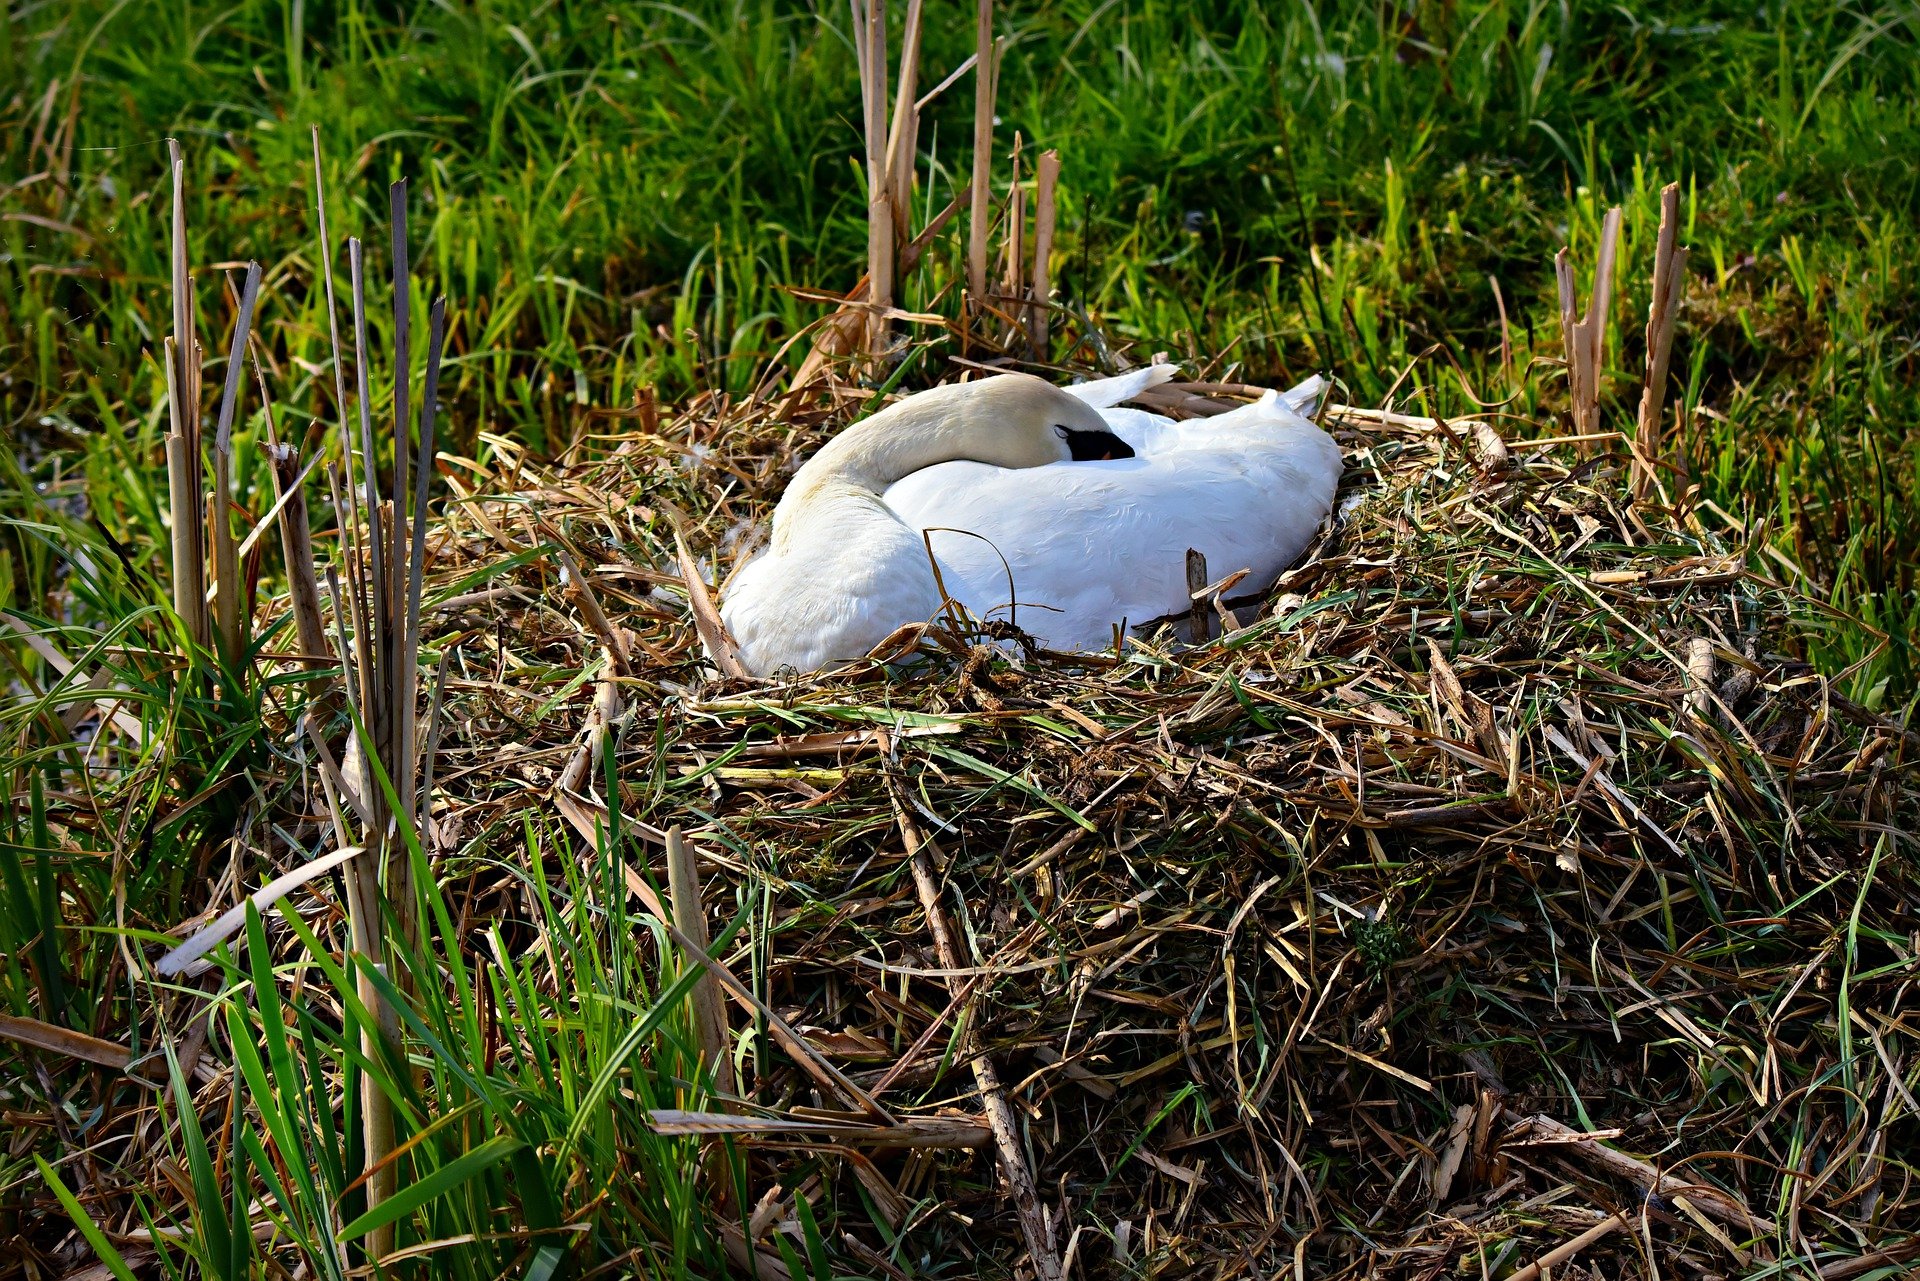 A swan protecting its nest. | Source: Pixabay.com